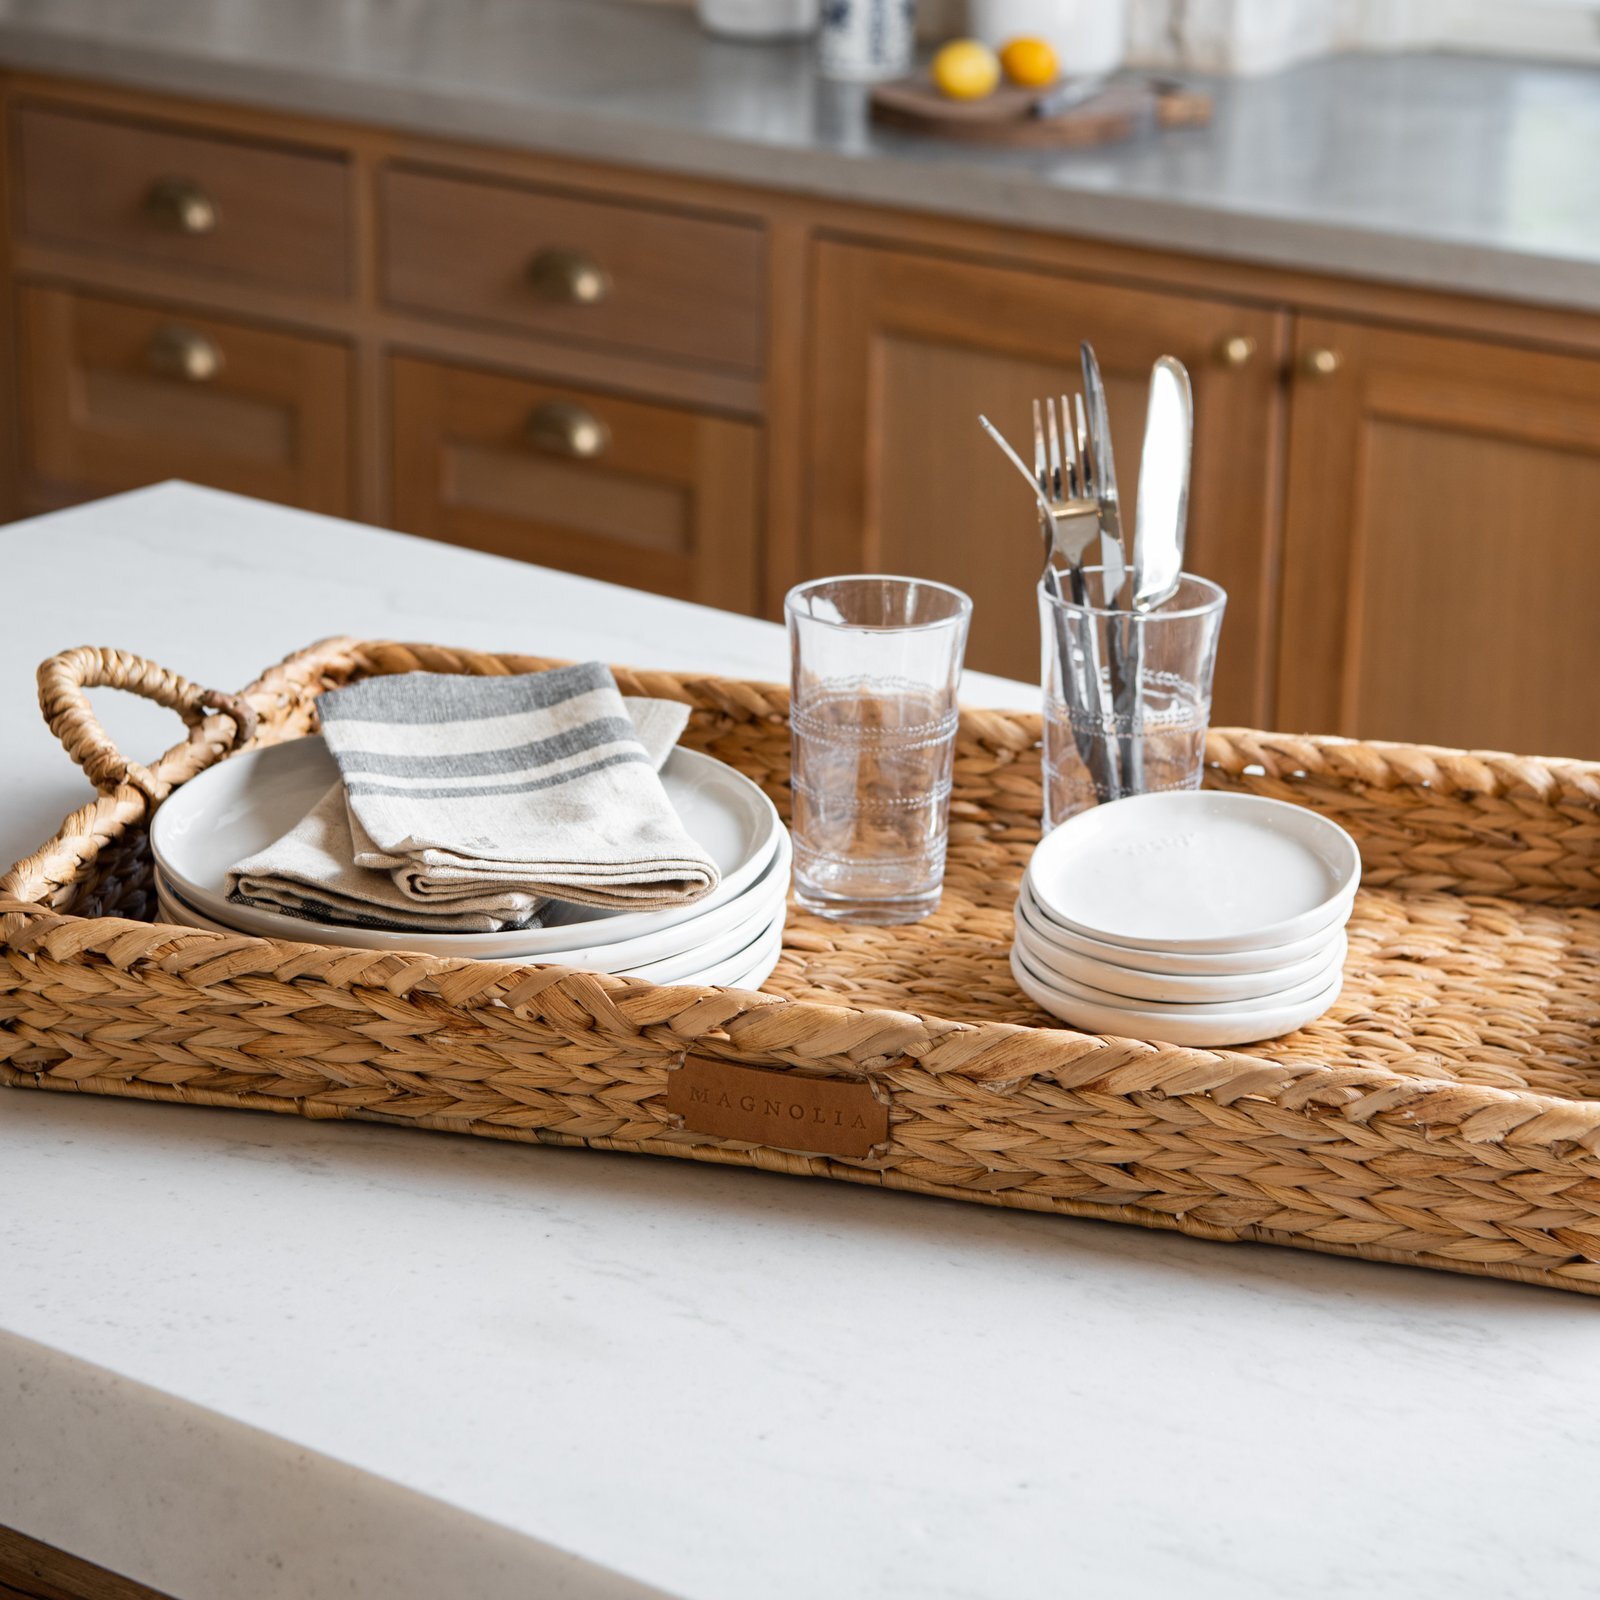 A tray to carry everything from the kitchen to the outdoor table.